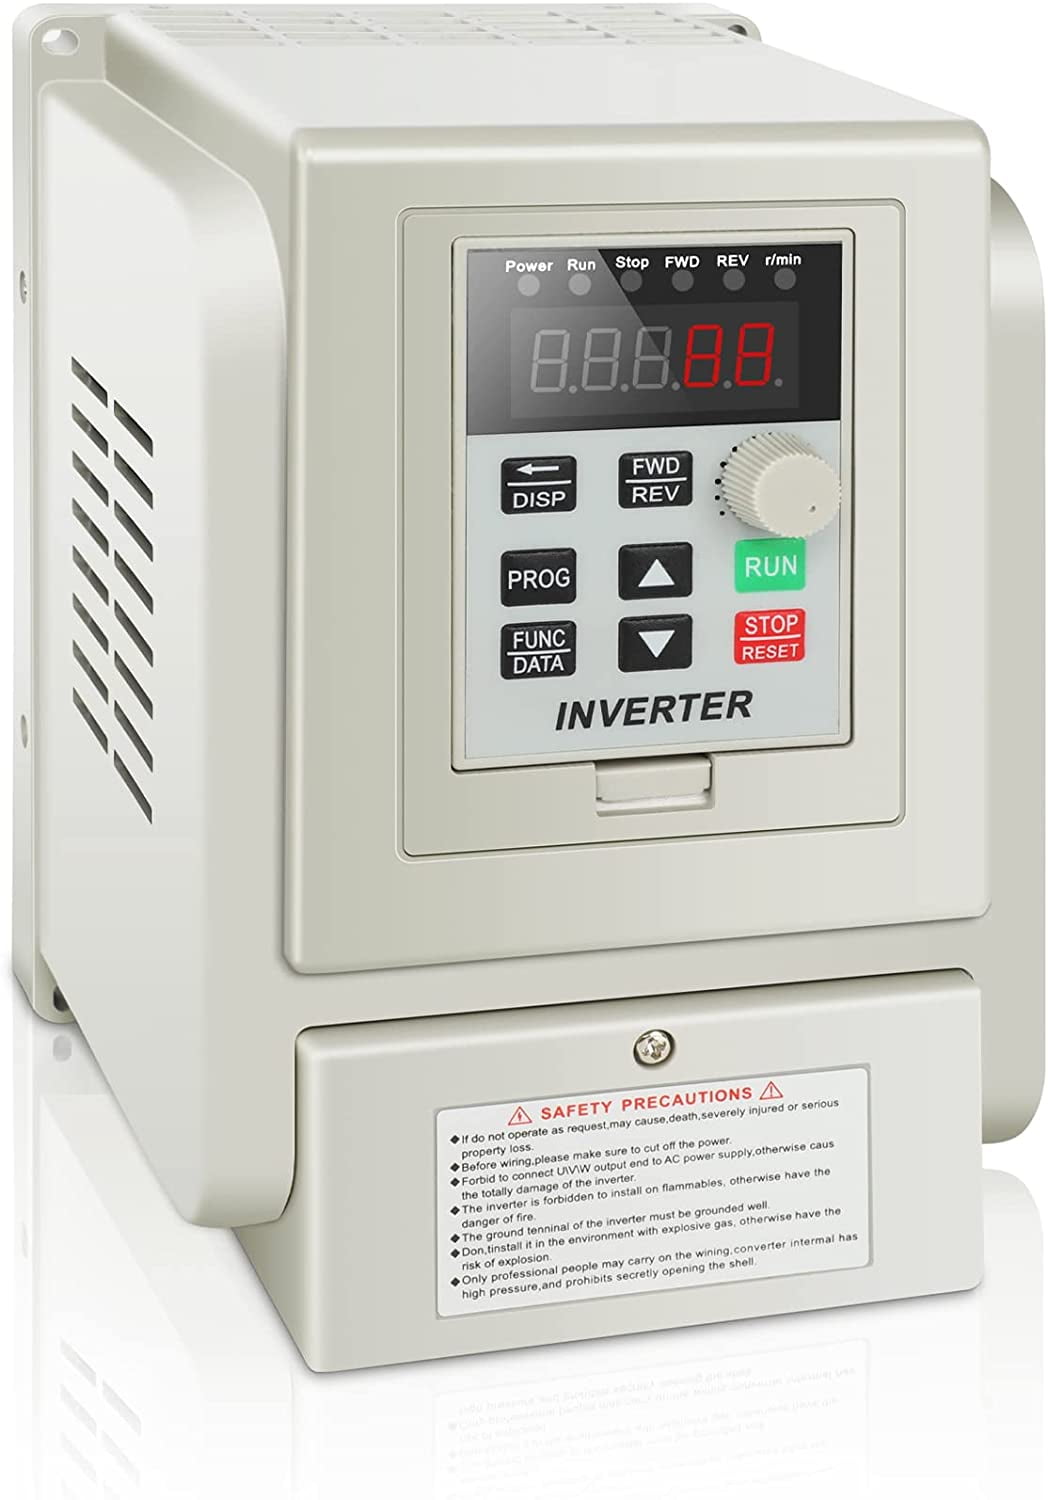 Single Phase Universal Variable Frequency Drive VFD Frequency Converter Inverter 2.2KW 220V